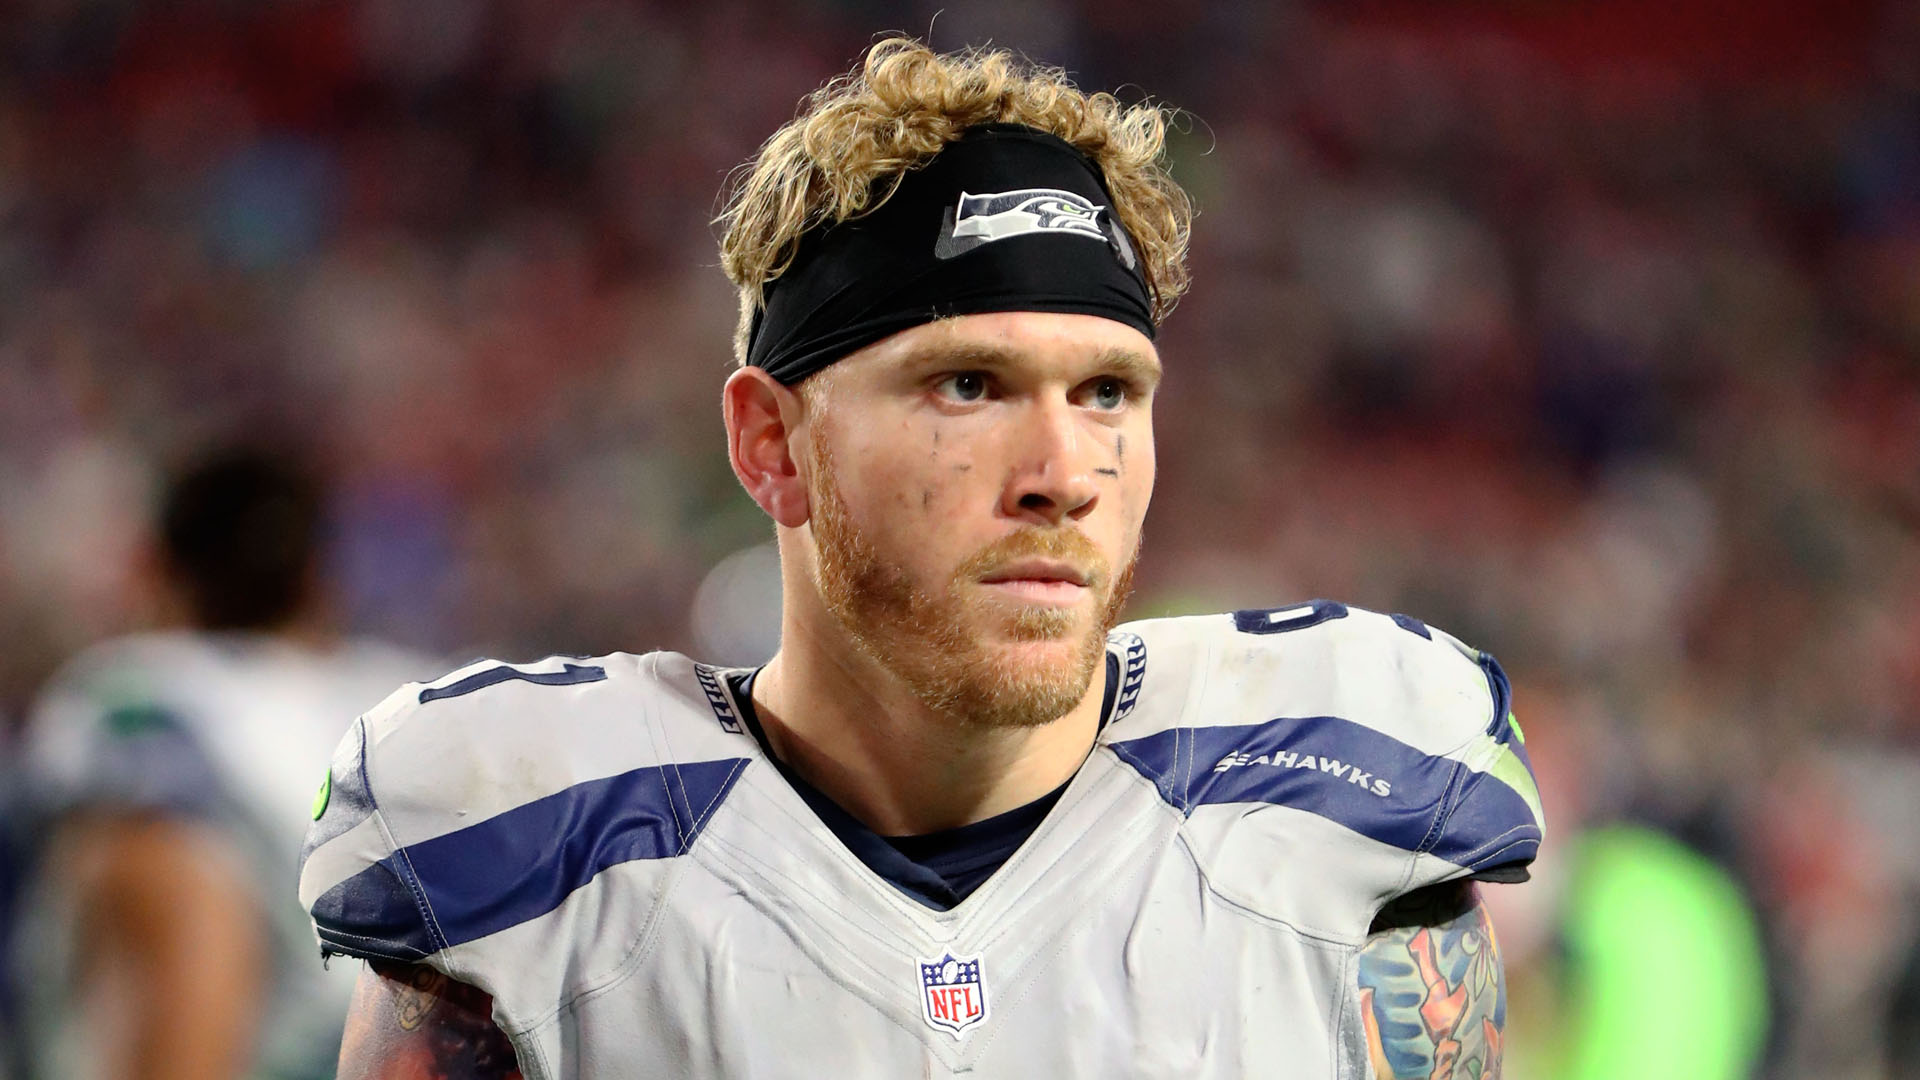 Seahawk Cassius Marsh's Magic cards were stolen, and he's offering